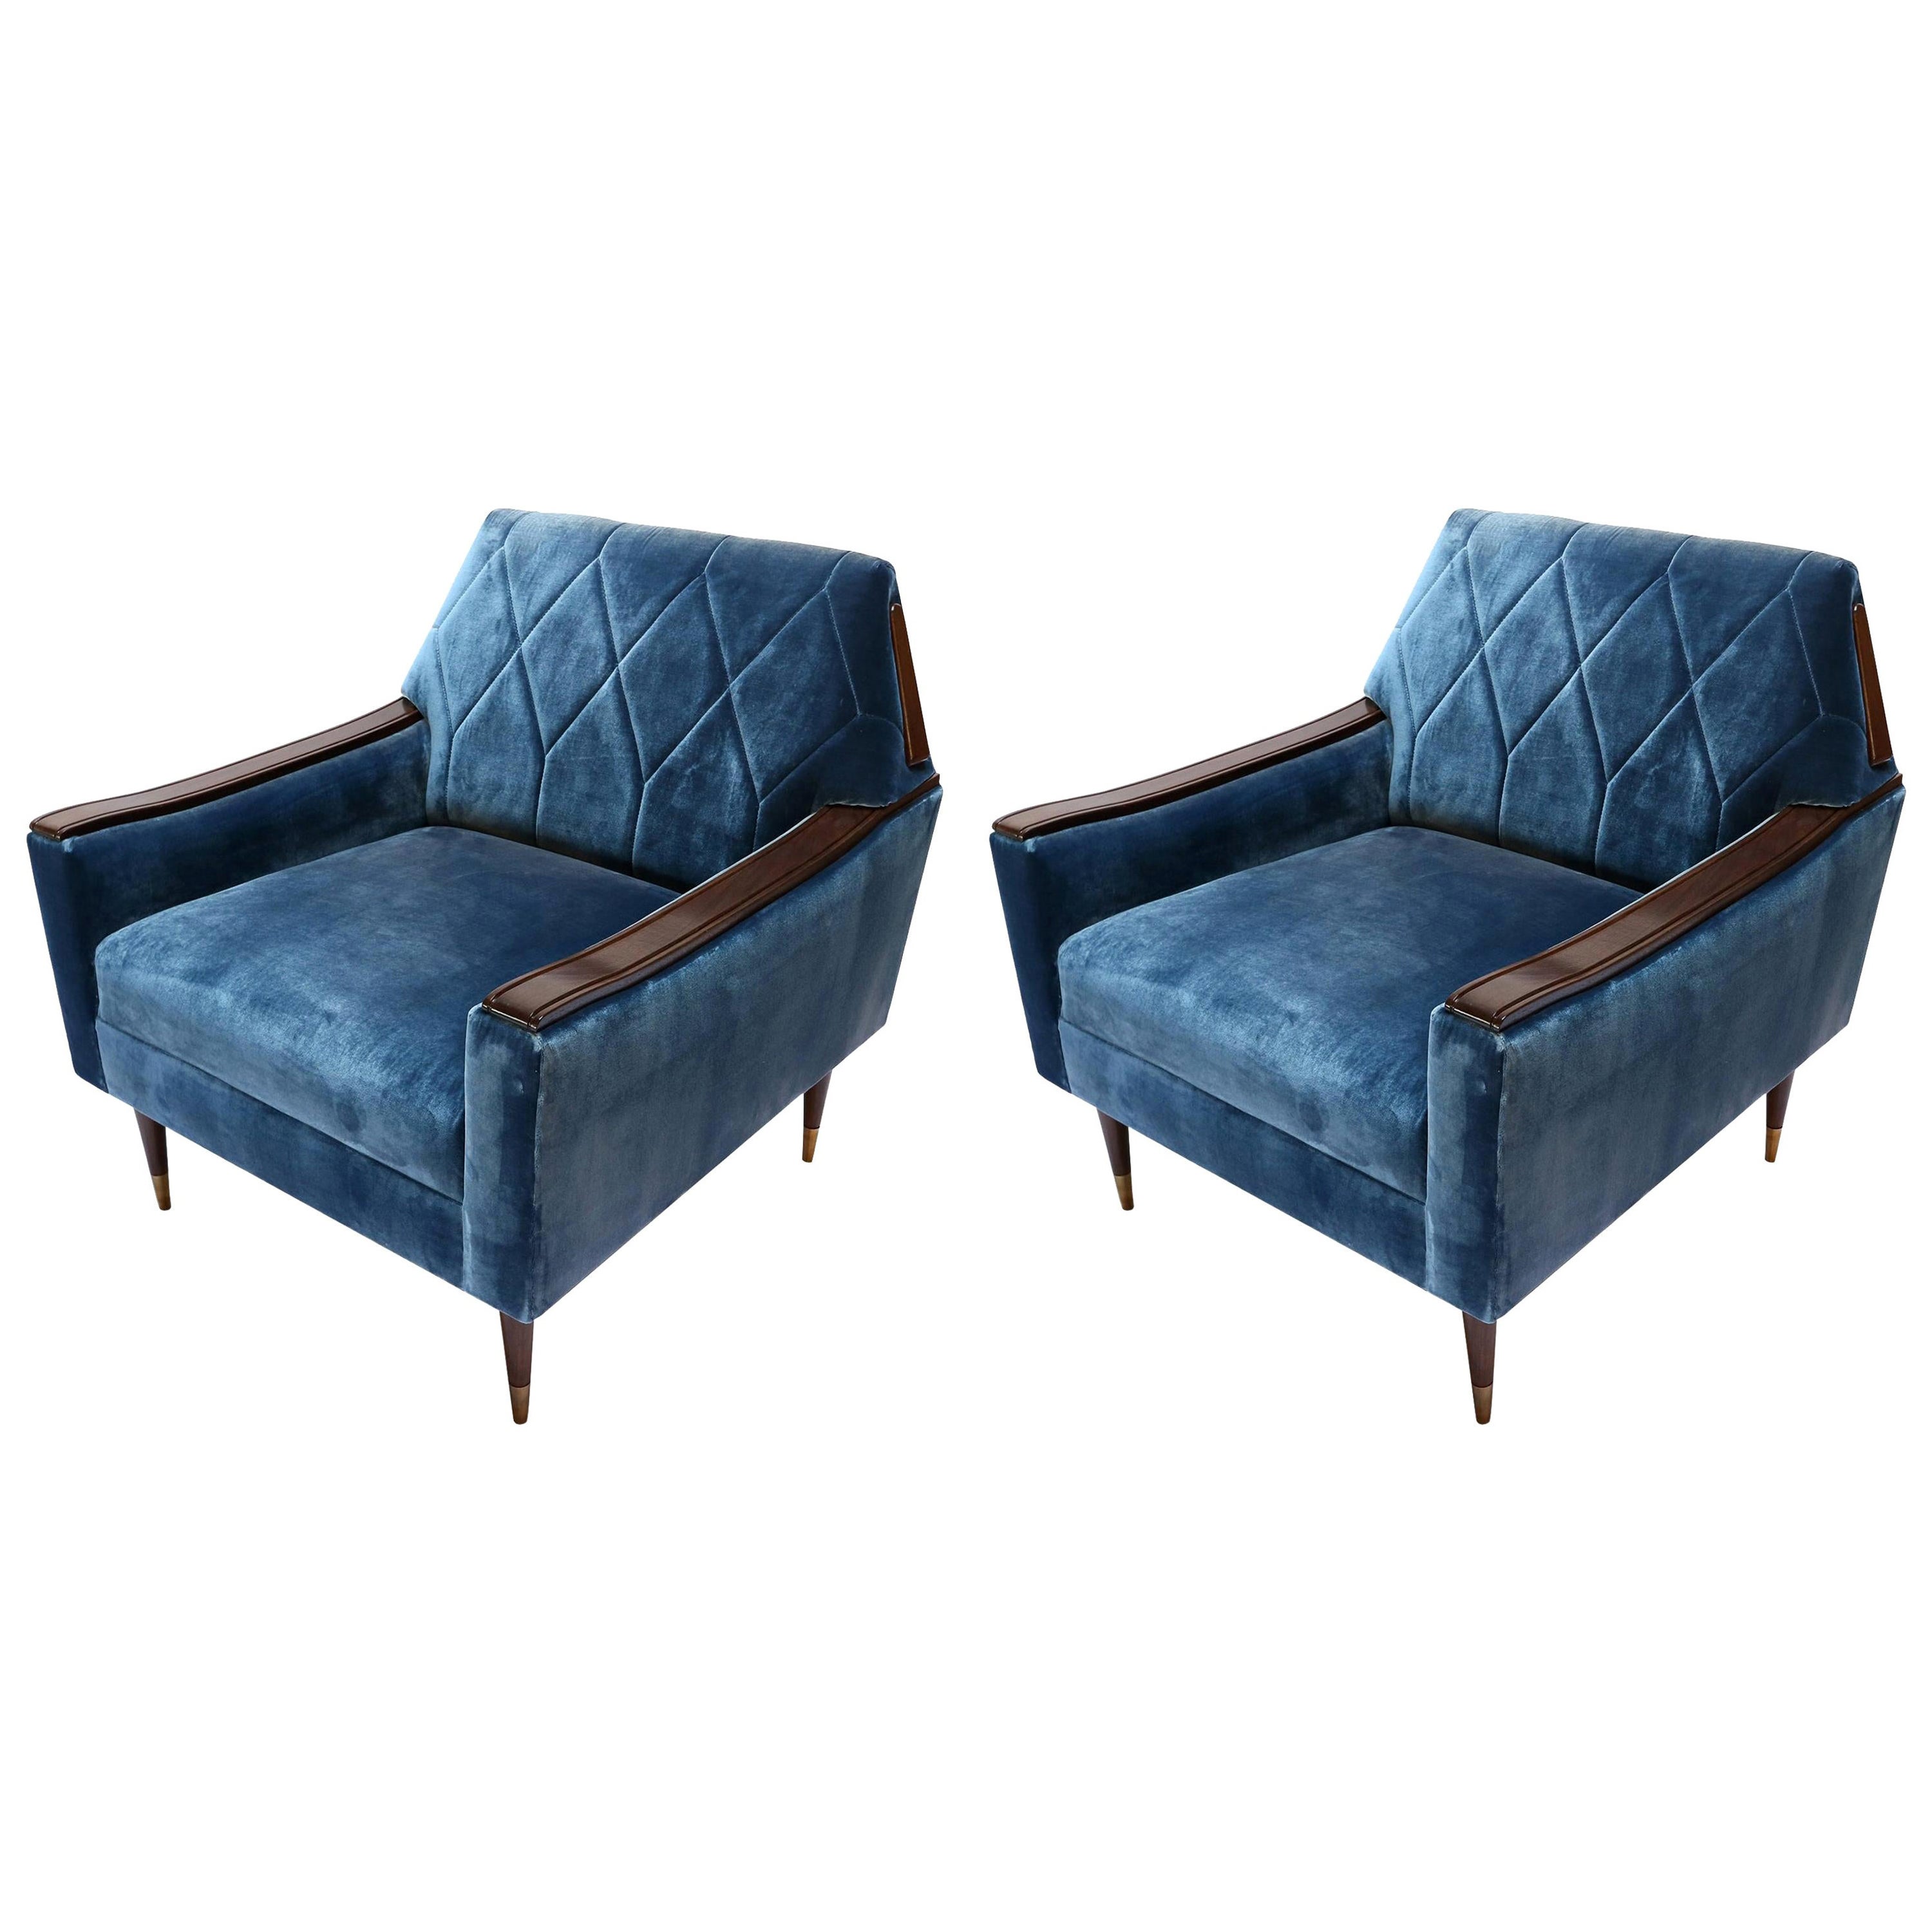 Pair of Custom 1960s Style Wood and Silk Velvet Armchairs by Adesso Imports For Sale